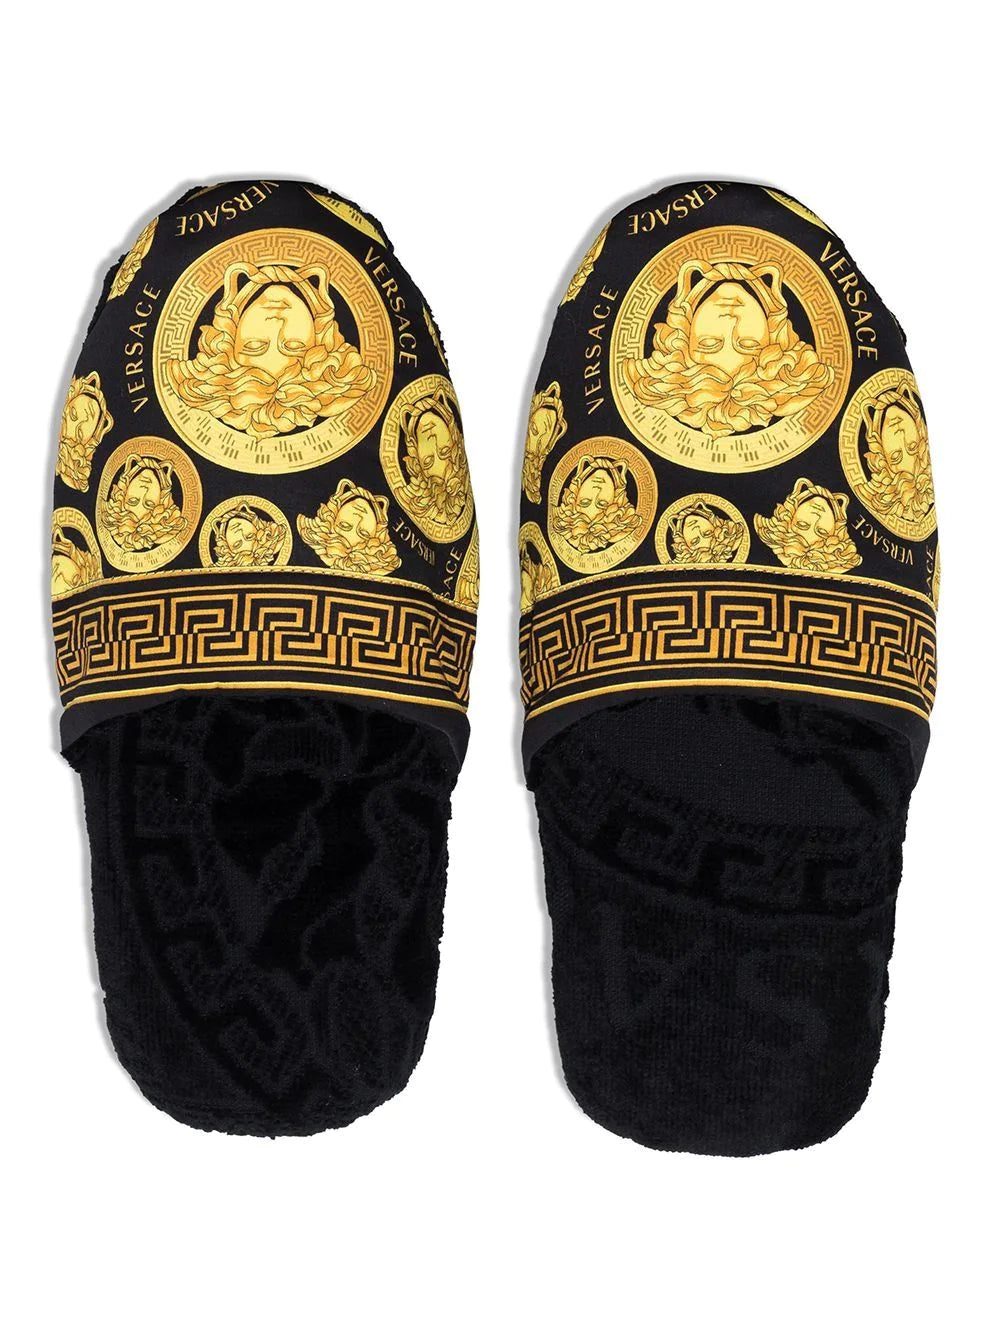 Versace Amplified Medusa Barocco Slippers